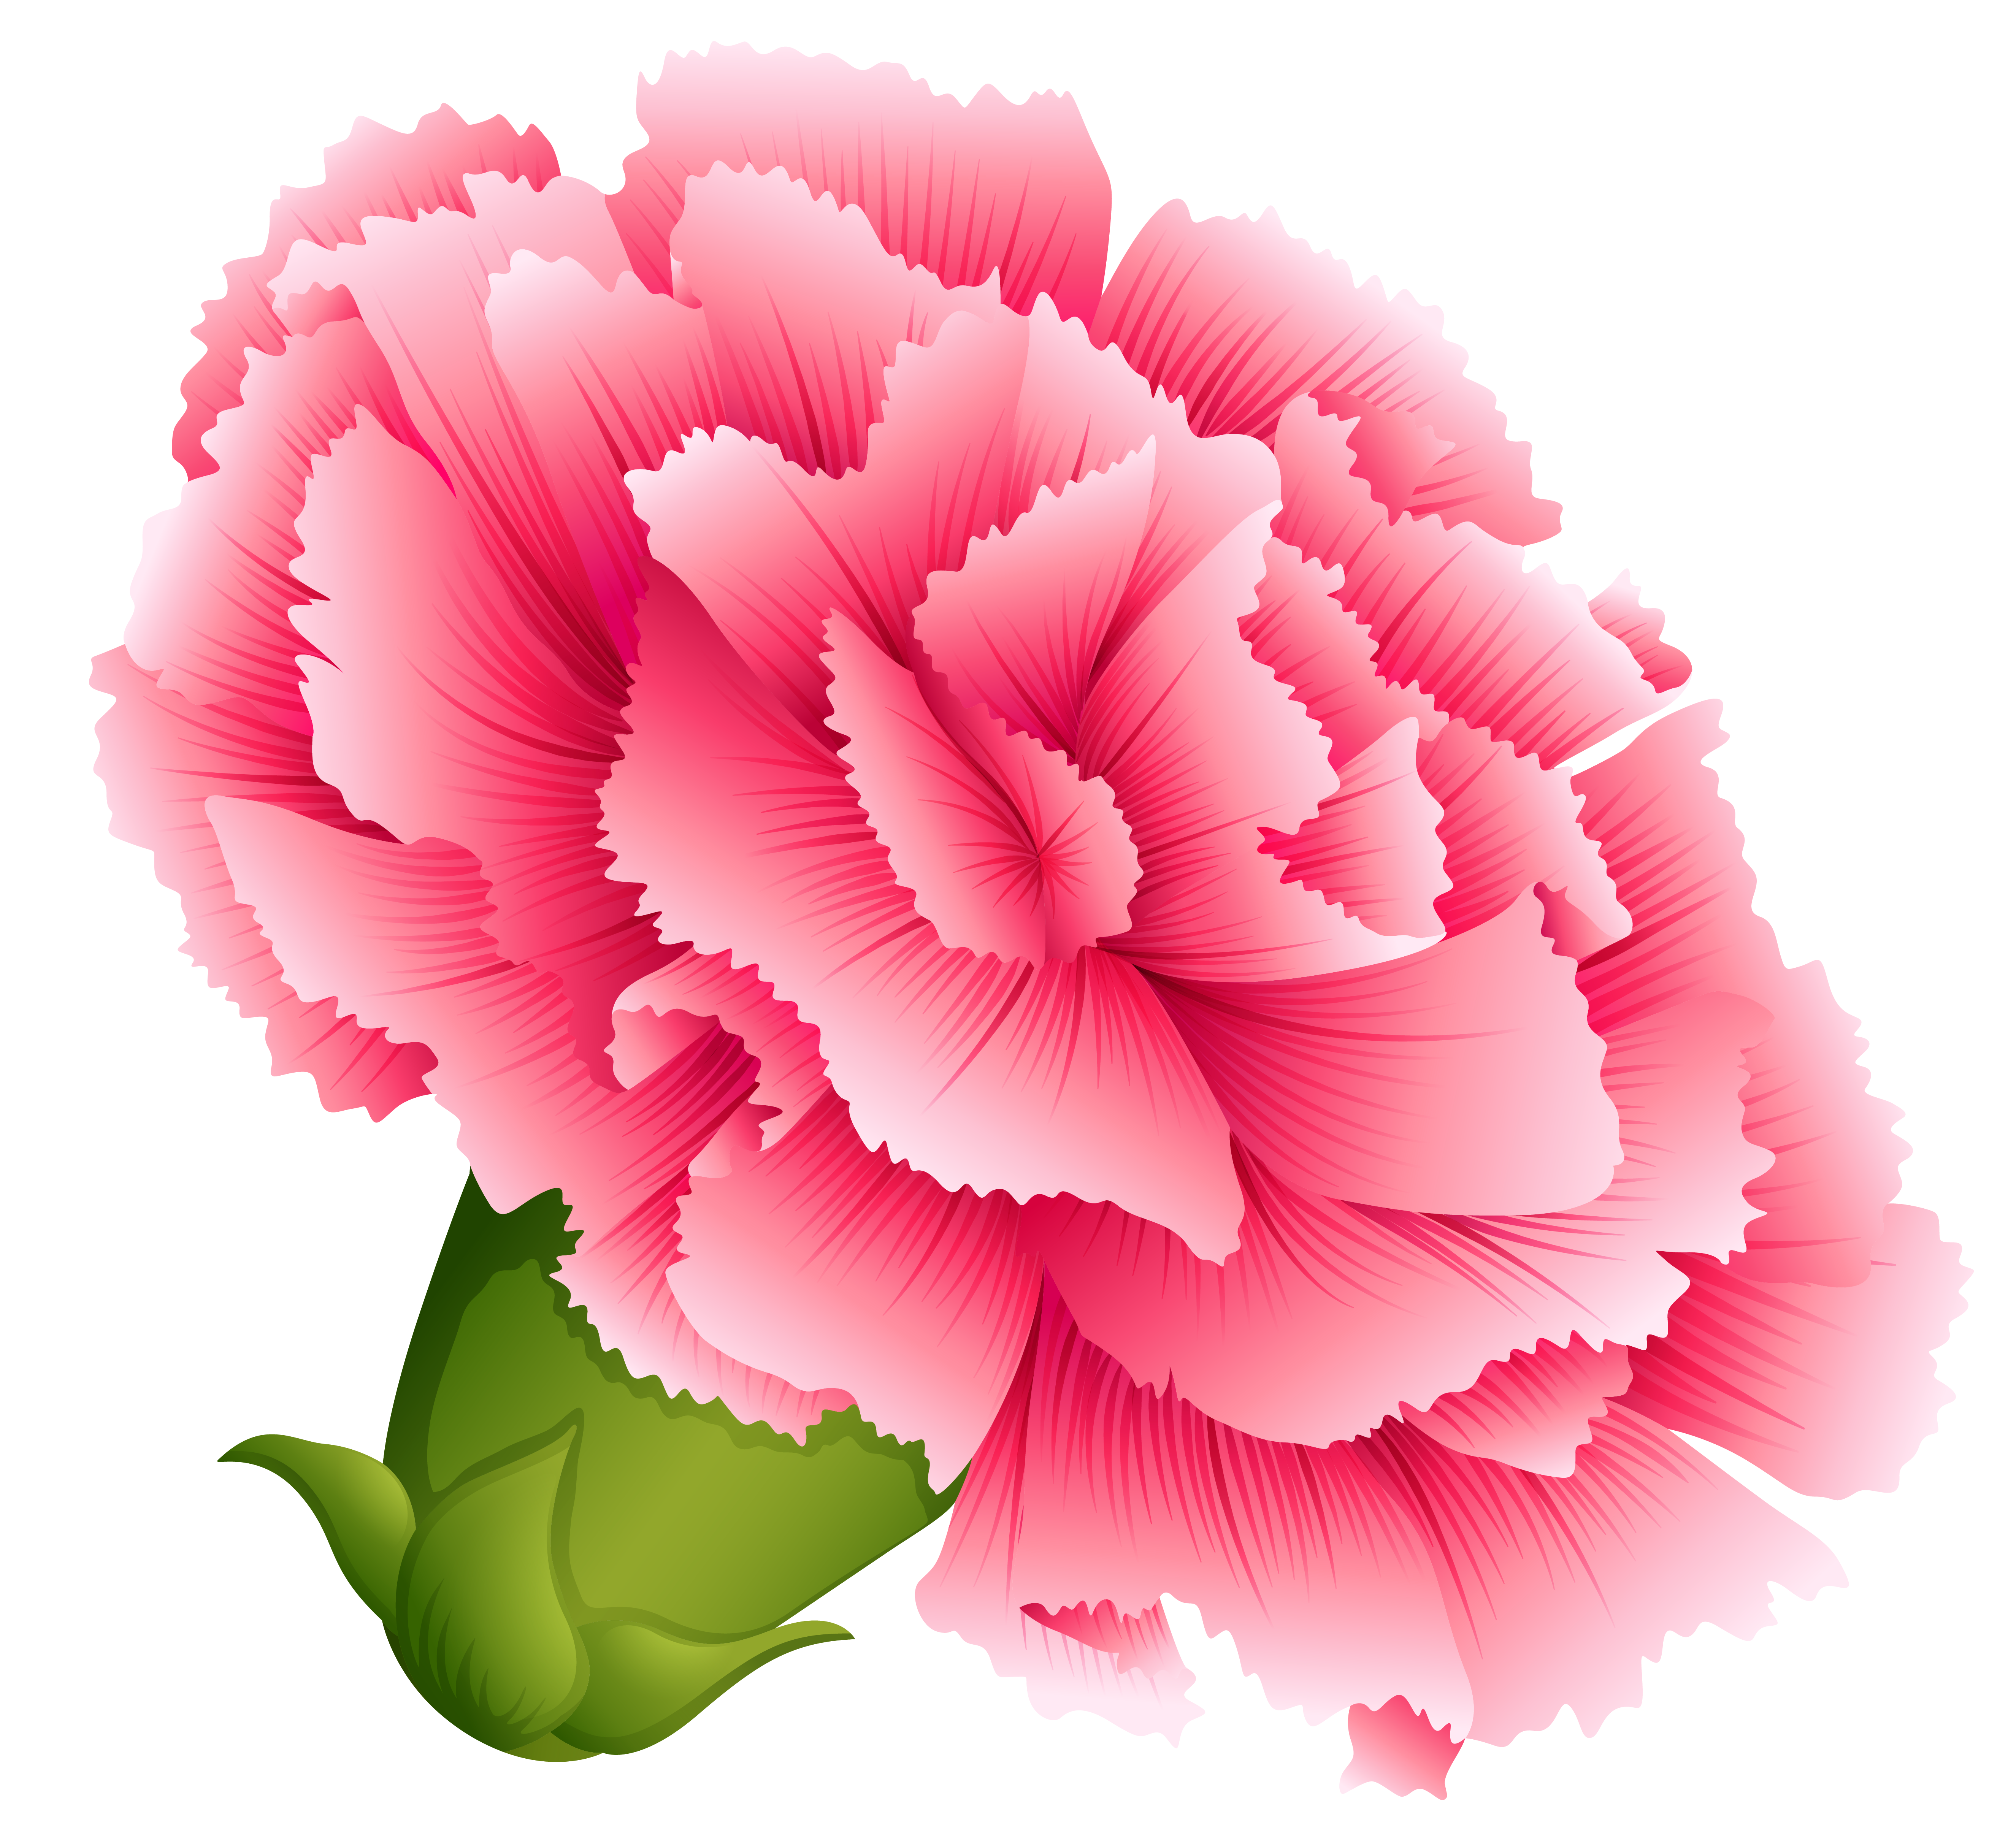 Pink Carnation PNG Clipart Image.